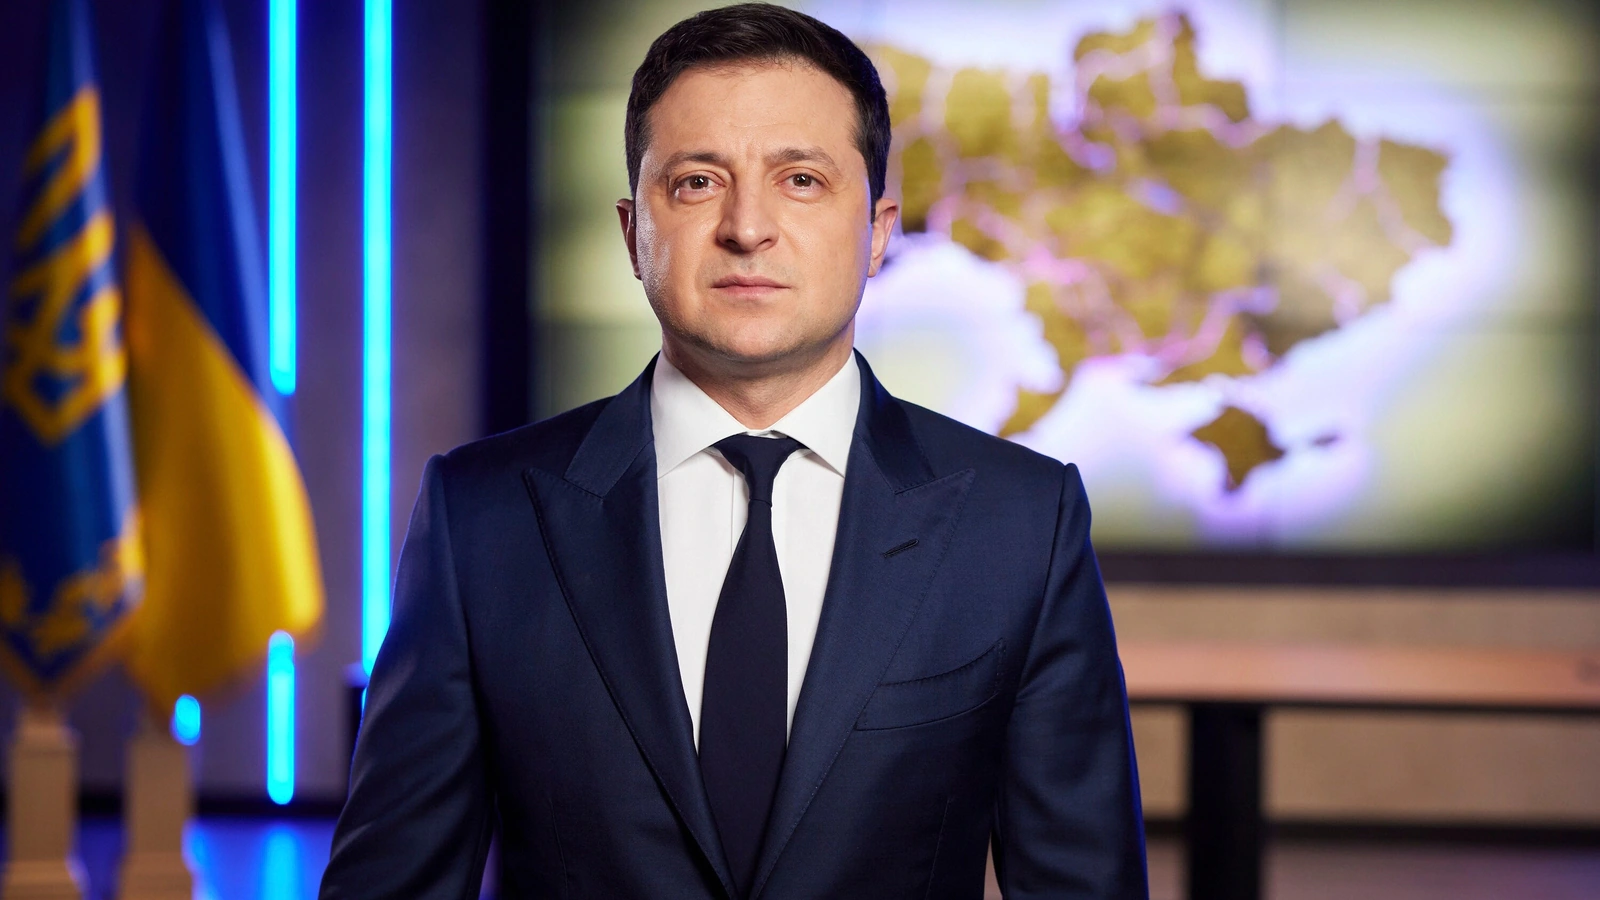 How did Zelensky pave a path to Presidency